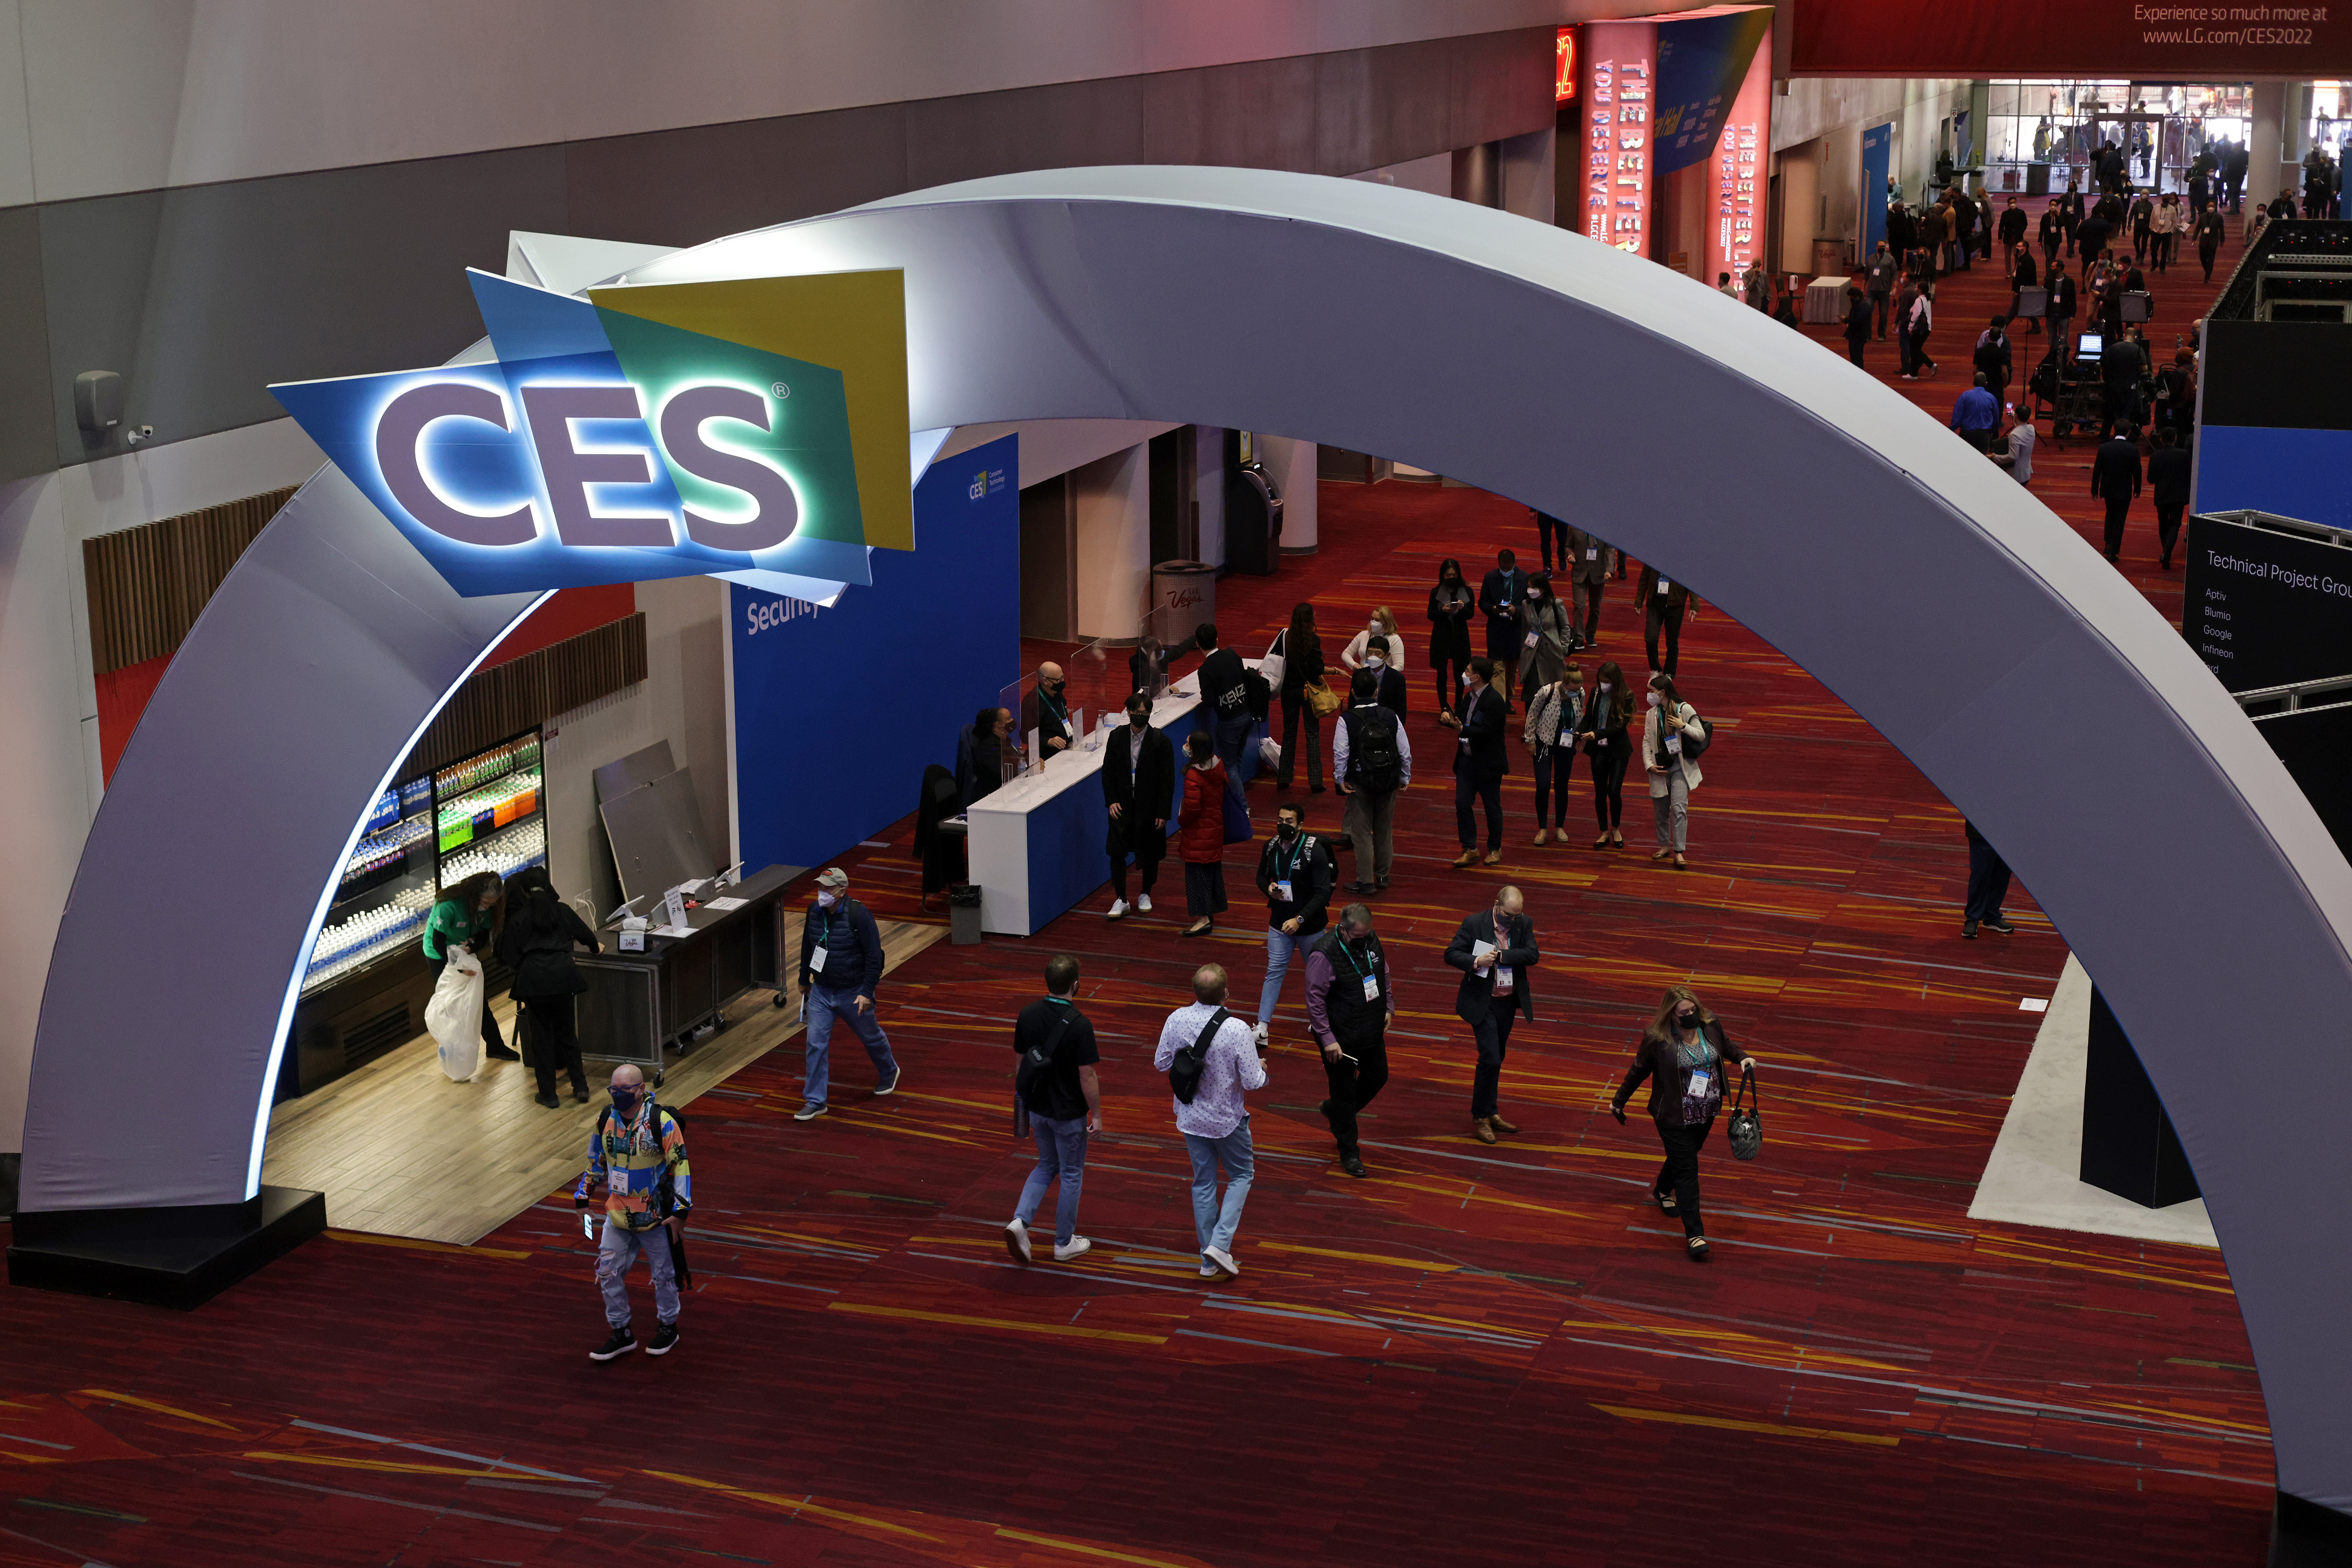 LAS VEGAS, NEVADA - JANUARY 5: Attendees walk through a hallway at the Las Vegas Convention Center on Day 1 of CES 2022, January 5, 2022 in Las Vegas, Nevada.  CES, the world's largest annual consumer technology trade show, will be held in person through January 7, with some companies deciding to just attend mostly or cancel attendance due to concerns about large increase in COVID-19 cases.  (Photo by Alex Wong/Getty Images)